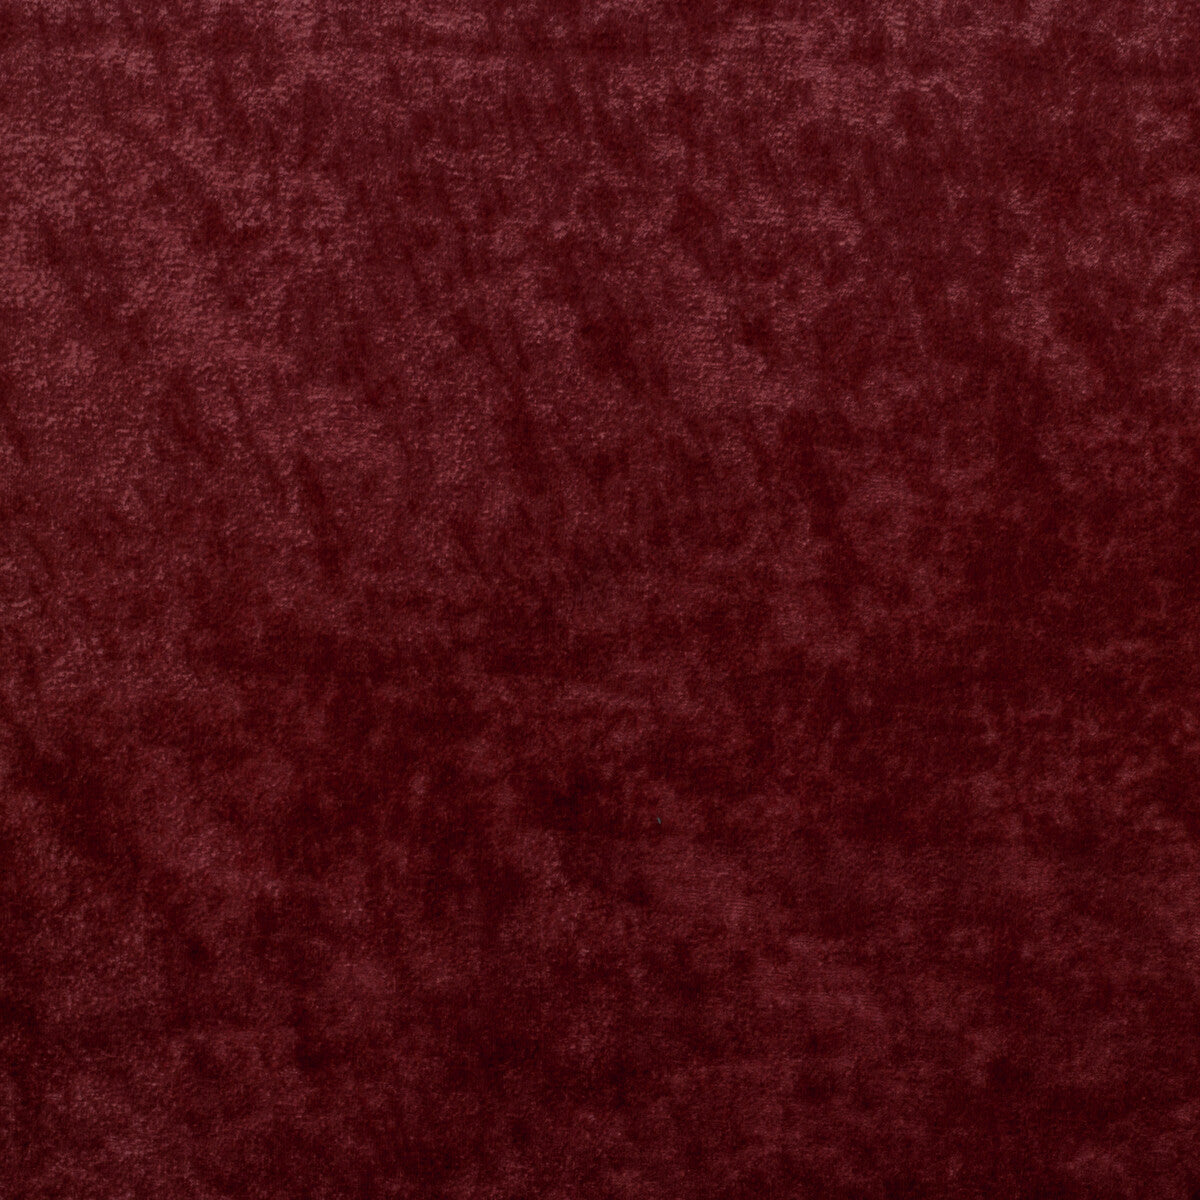 Triumphant fabric in ruby color - pattern 36065.9.0 - by Kravet Couture